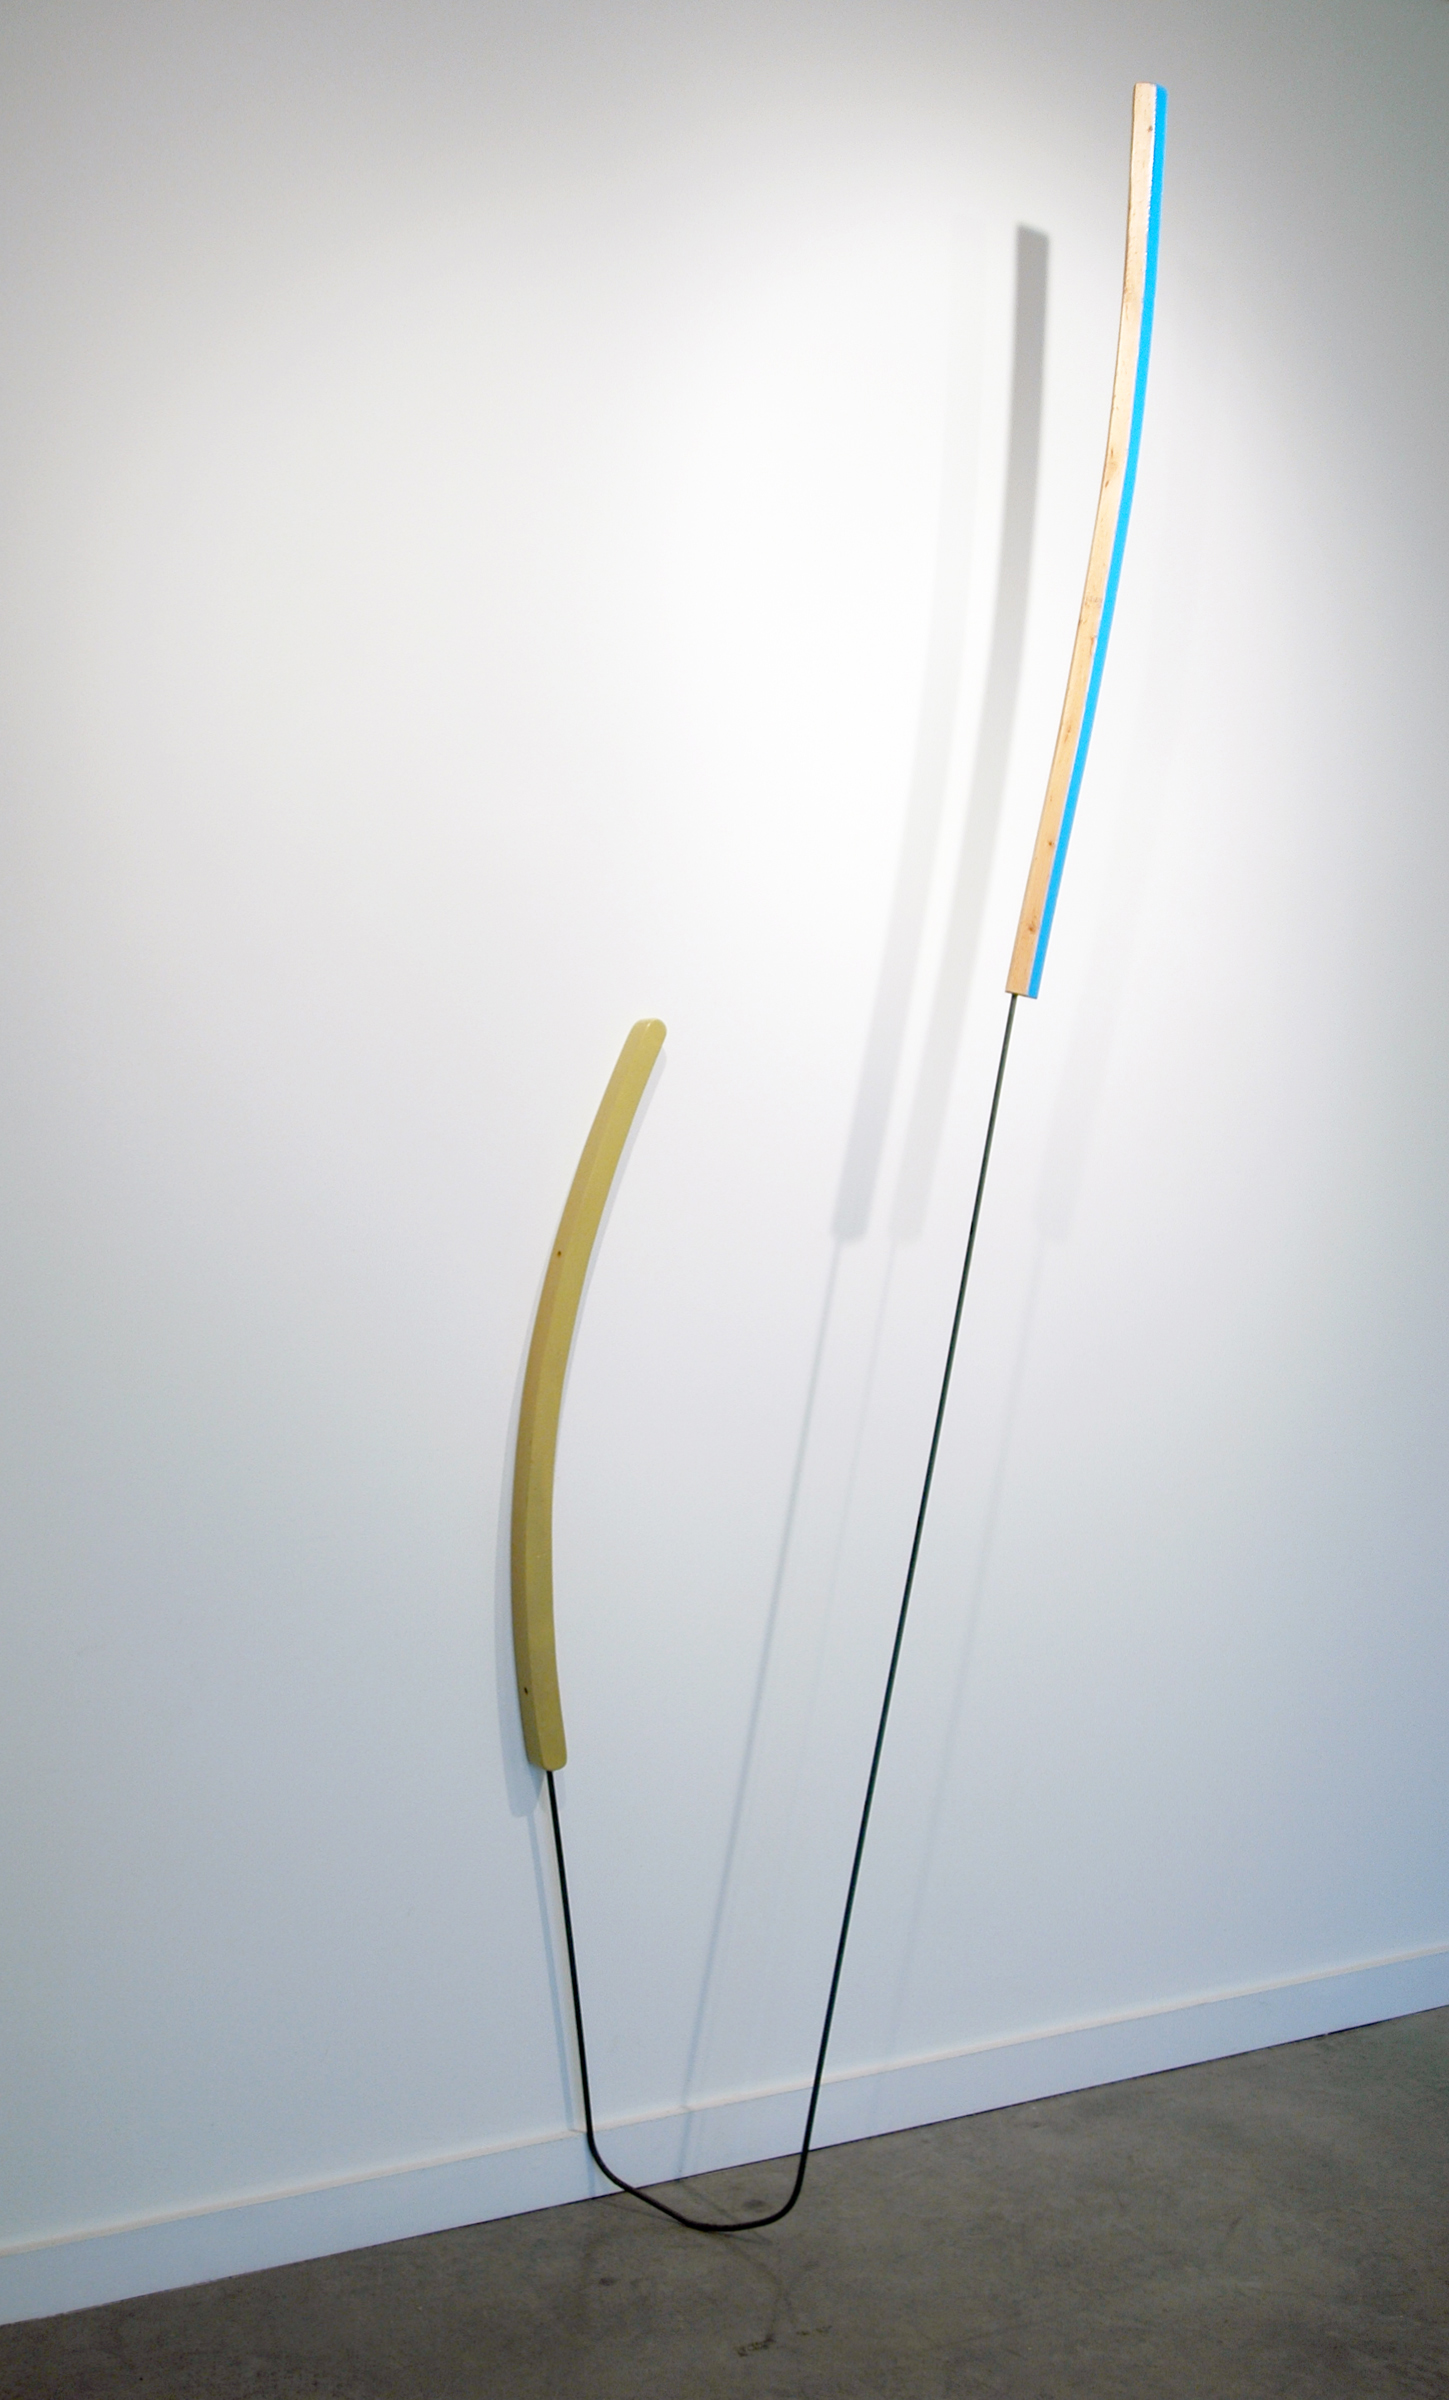   KIRK STOLLER   Untitled (prong) , wood, acrylic, metal and resin, 103" H x 26" W x 14" D 